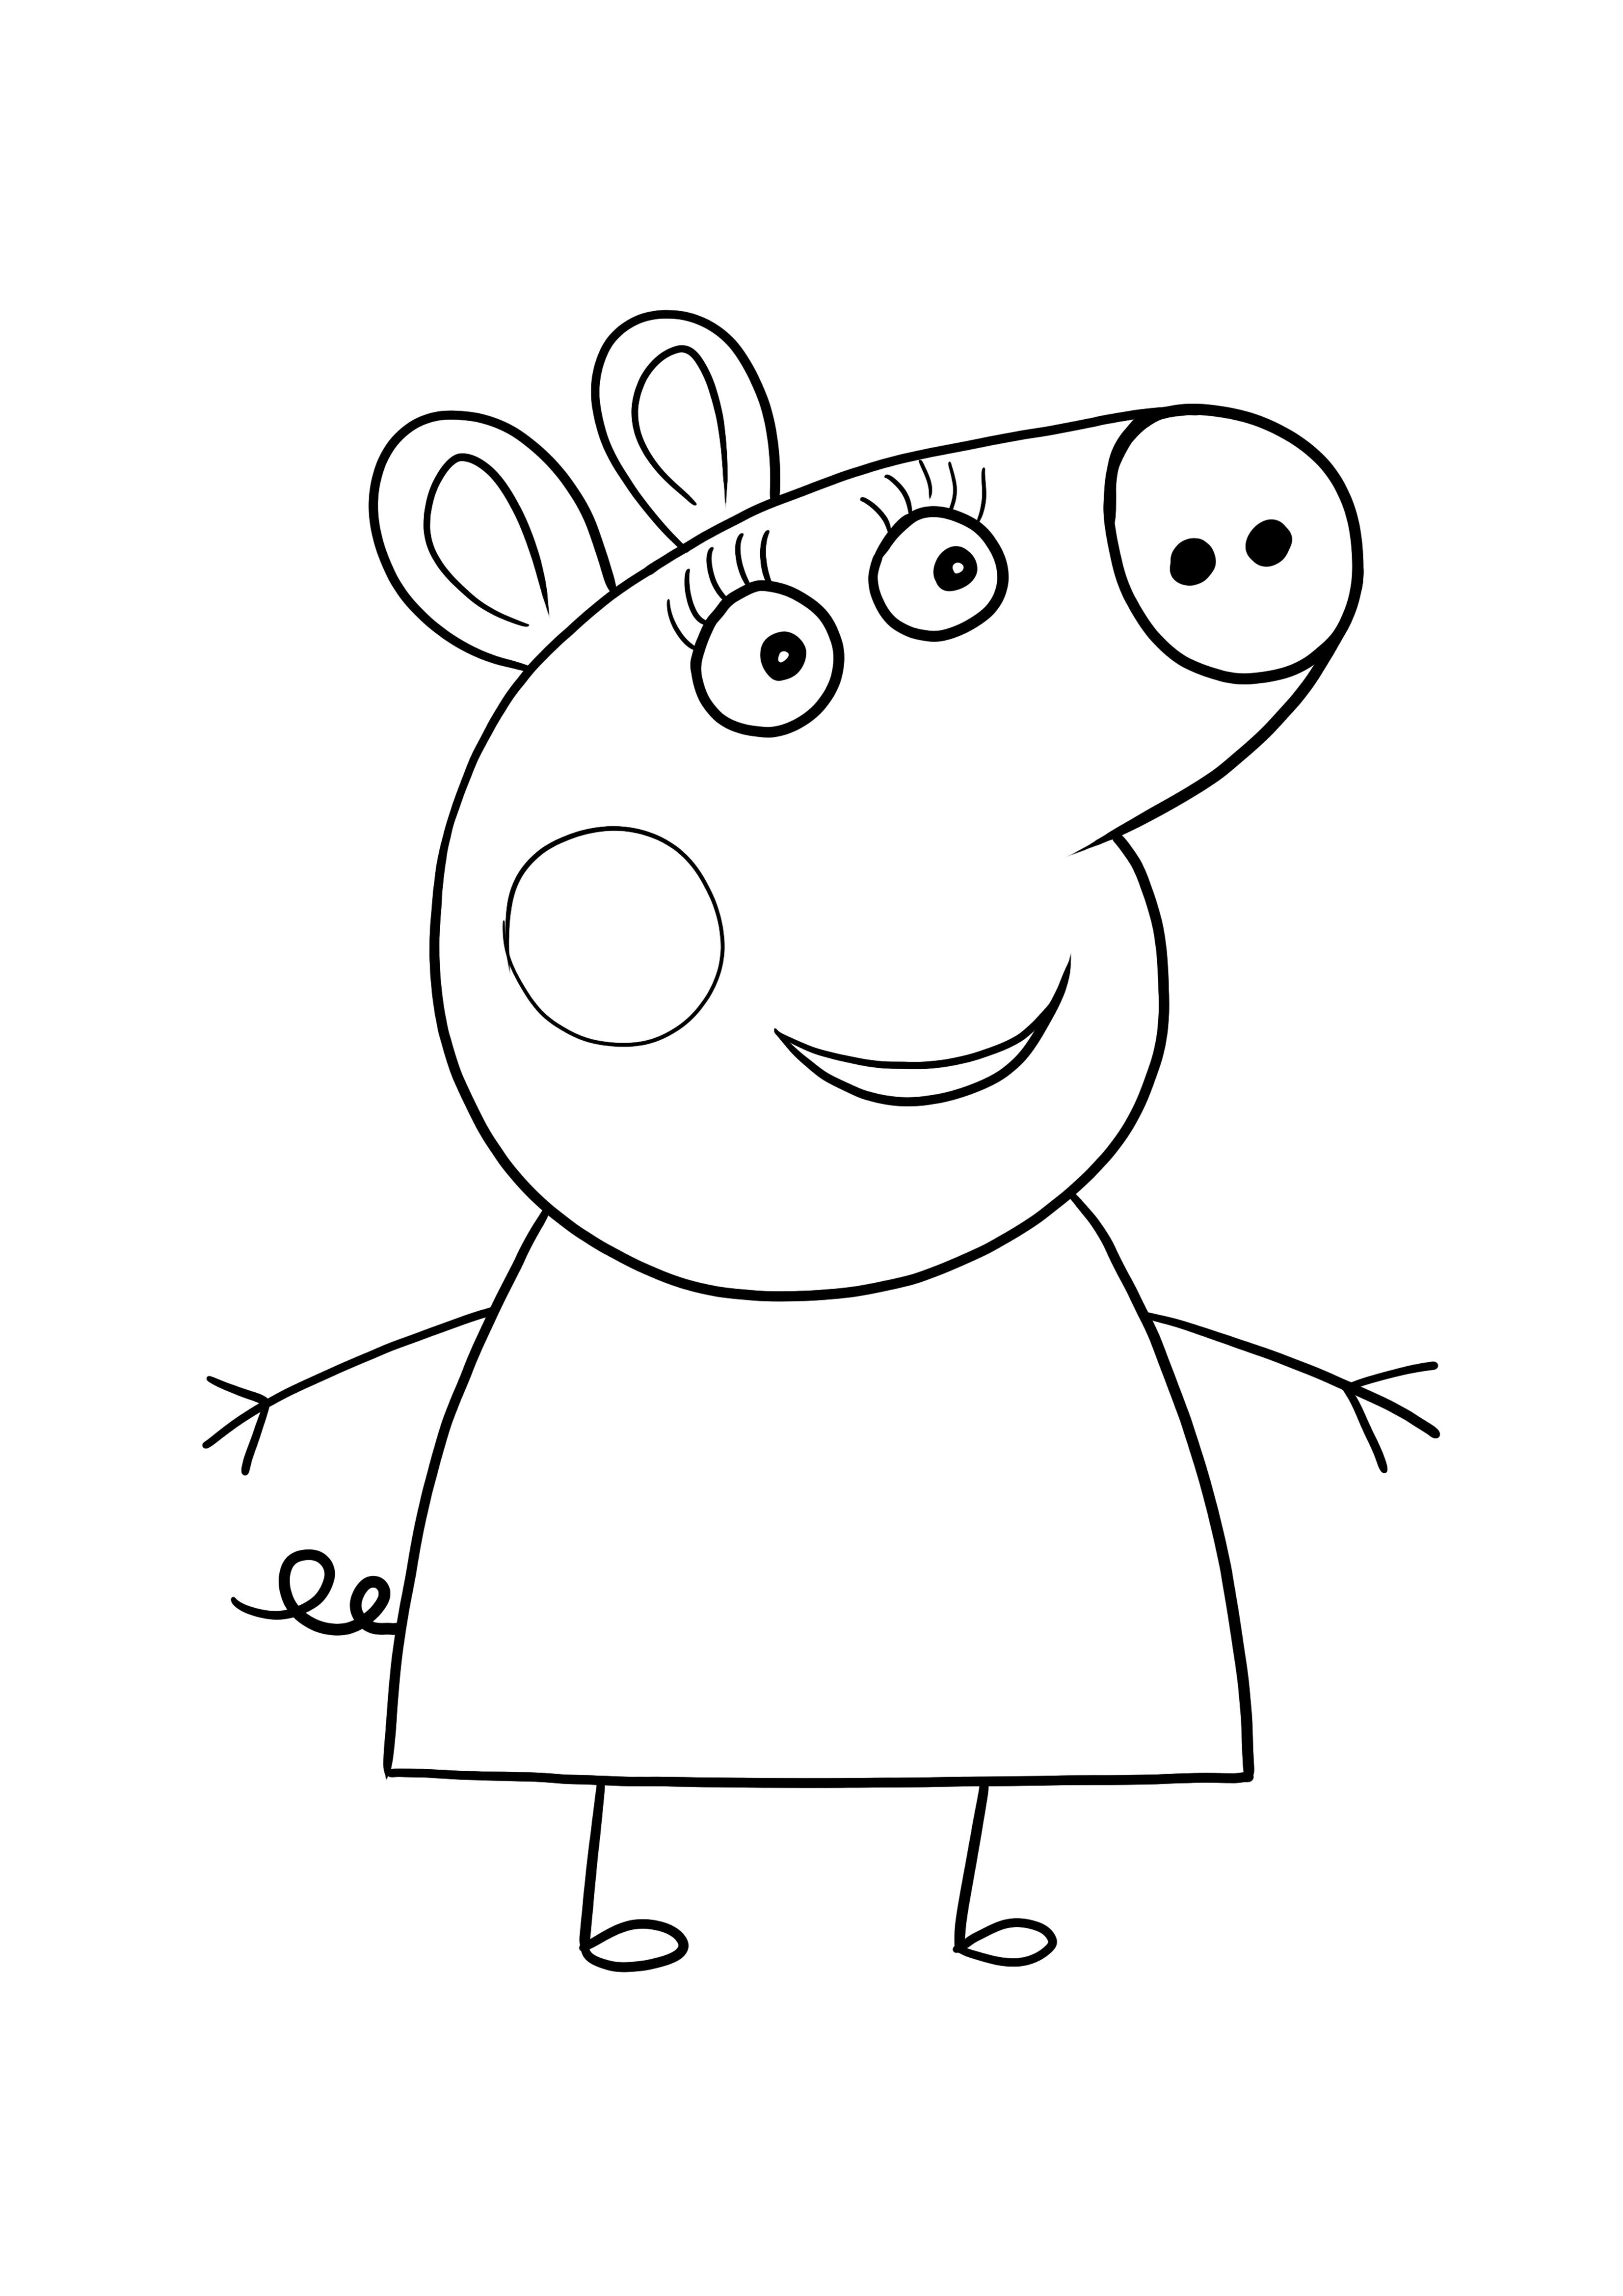 Smiling Peppa, simple coloring and printing